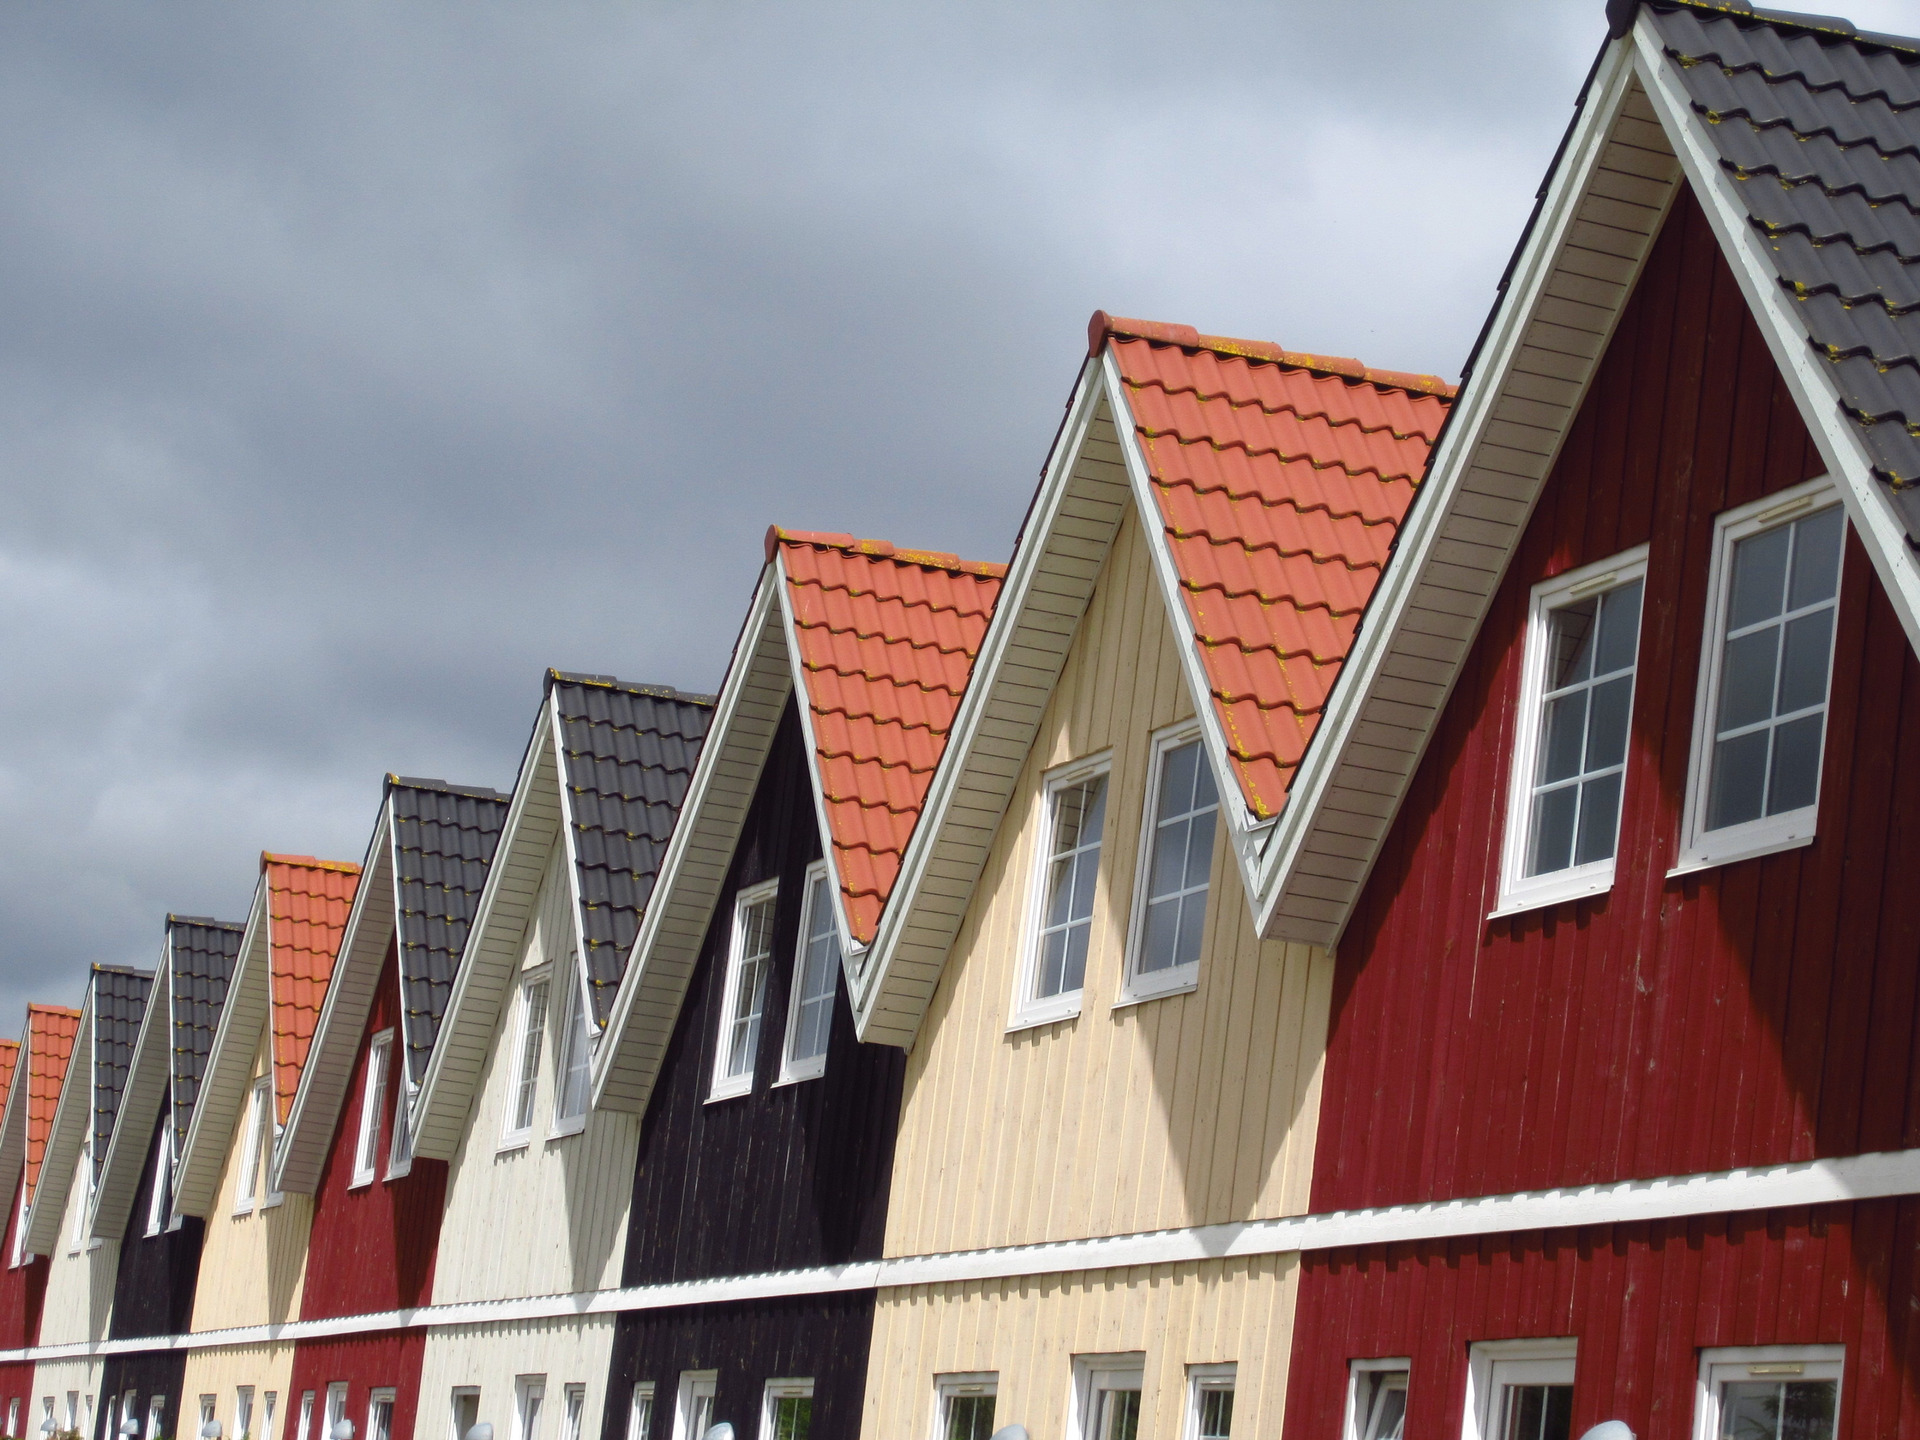 Wooden houses, colourful, arranged in a row